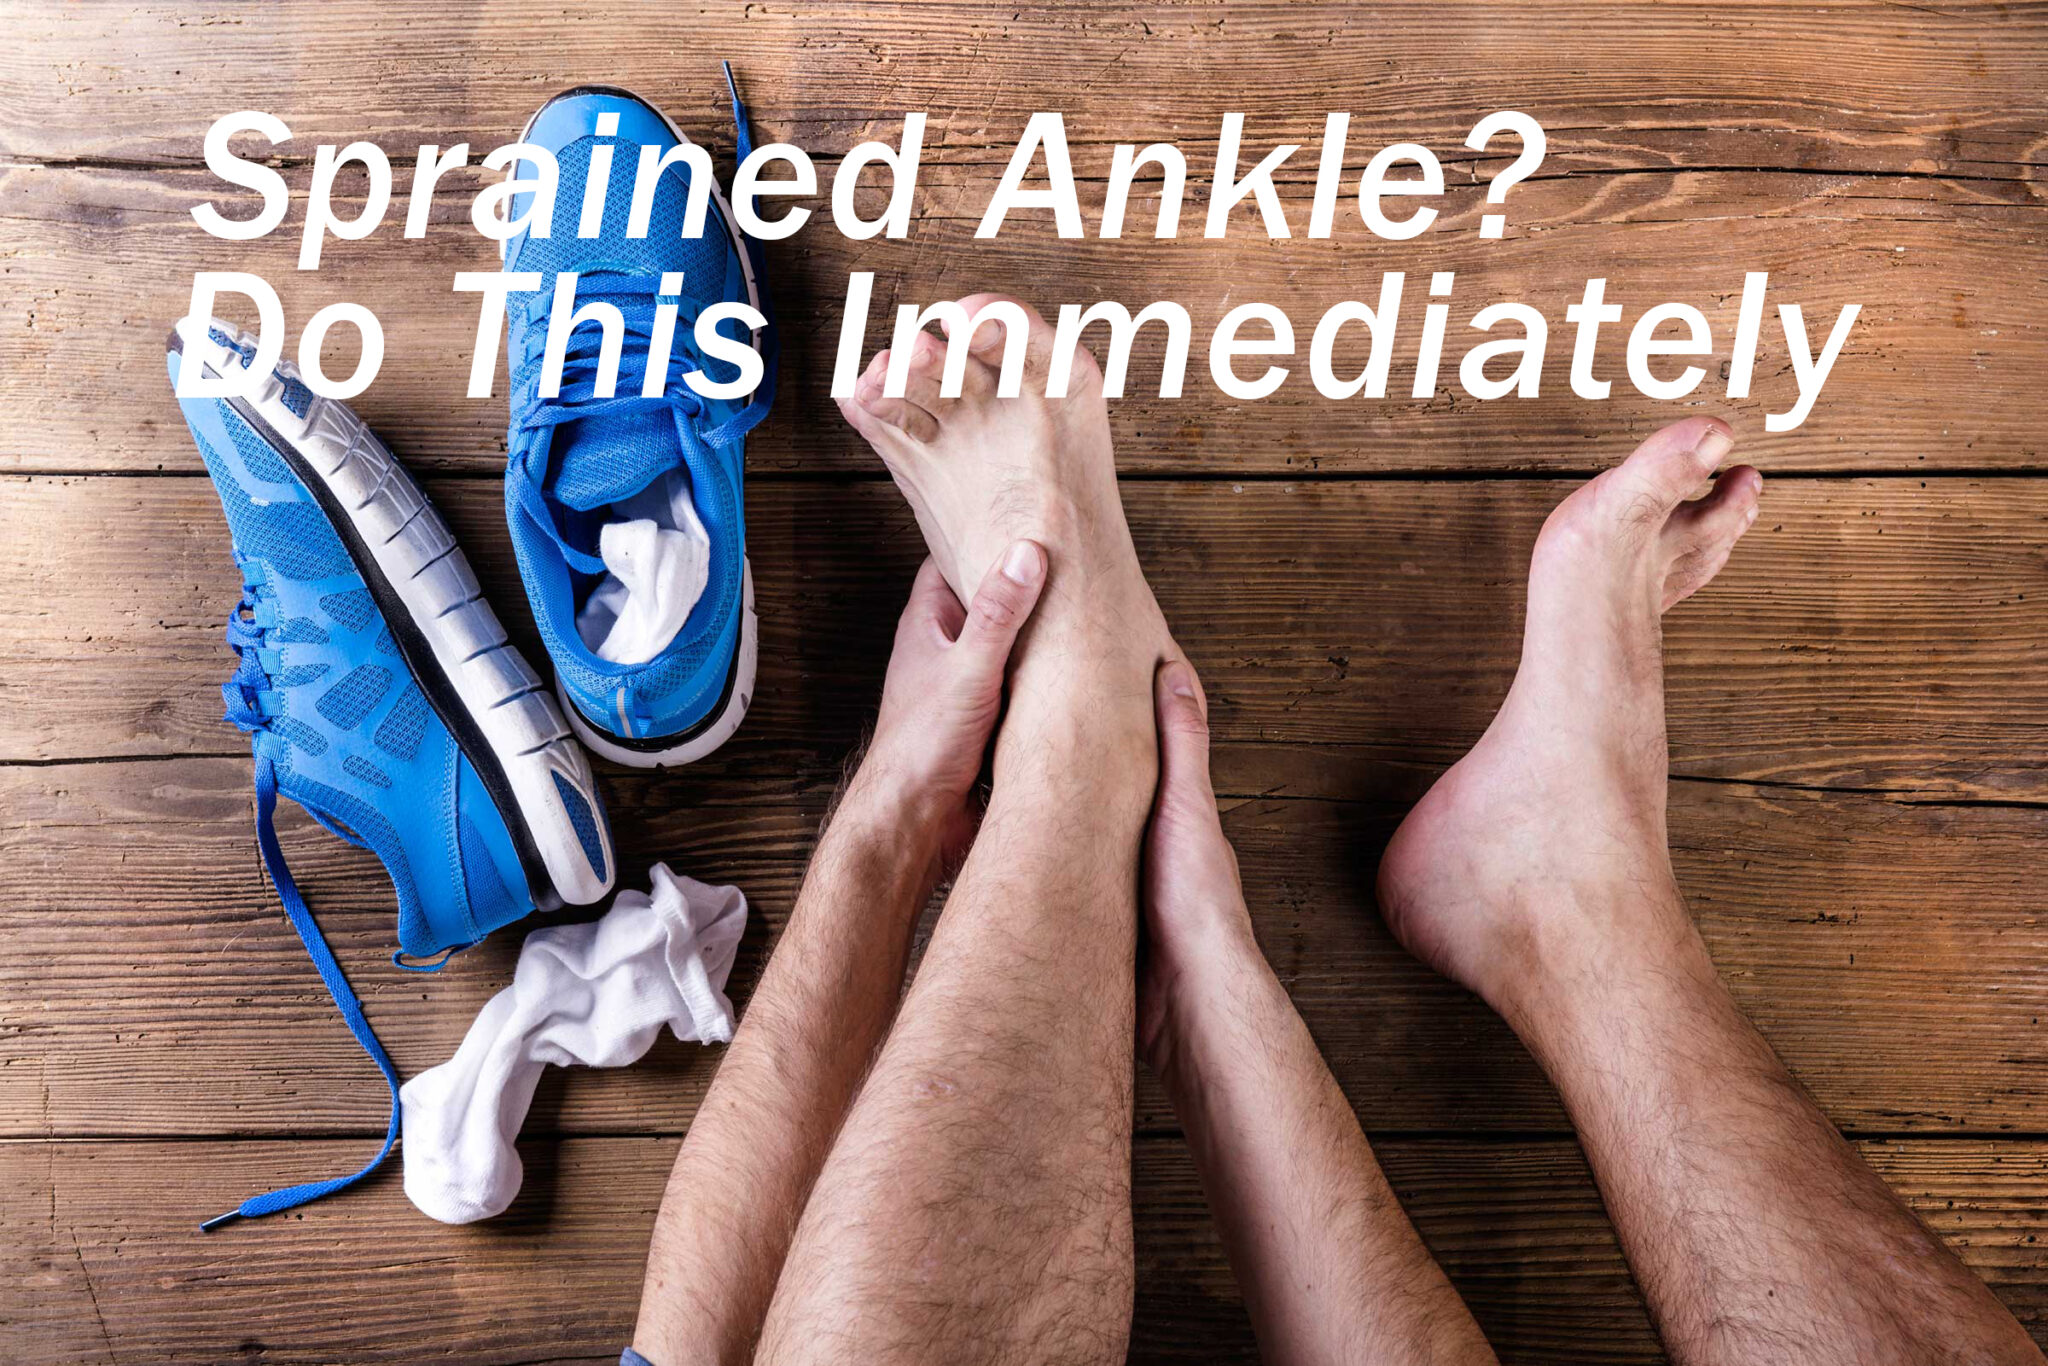 I Sprained My Ankle, What Should I Do? Immediate Things to Do